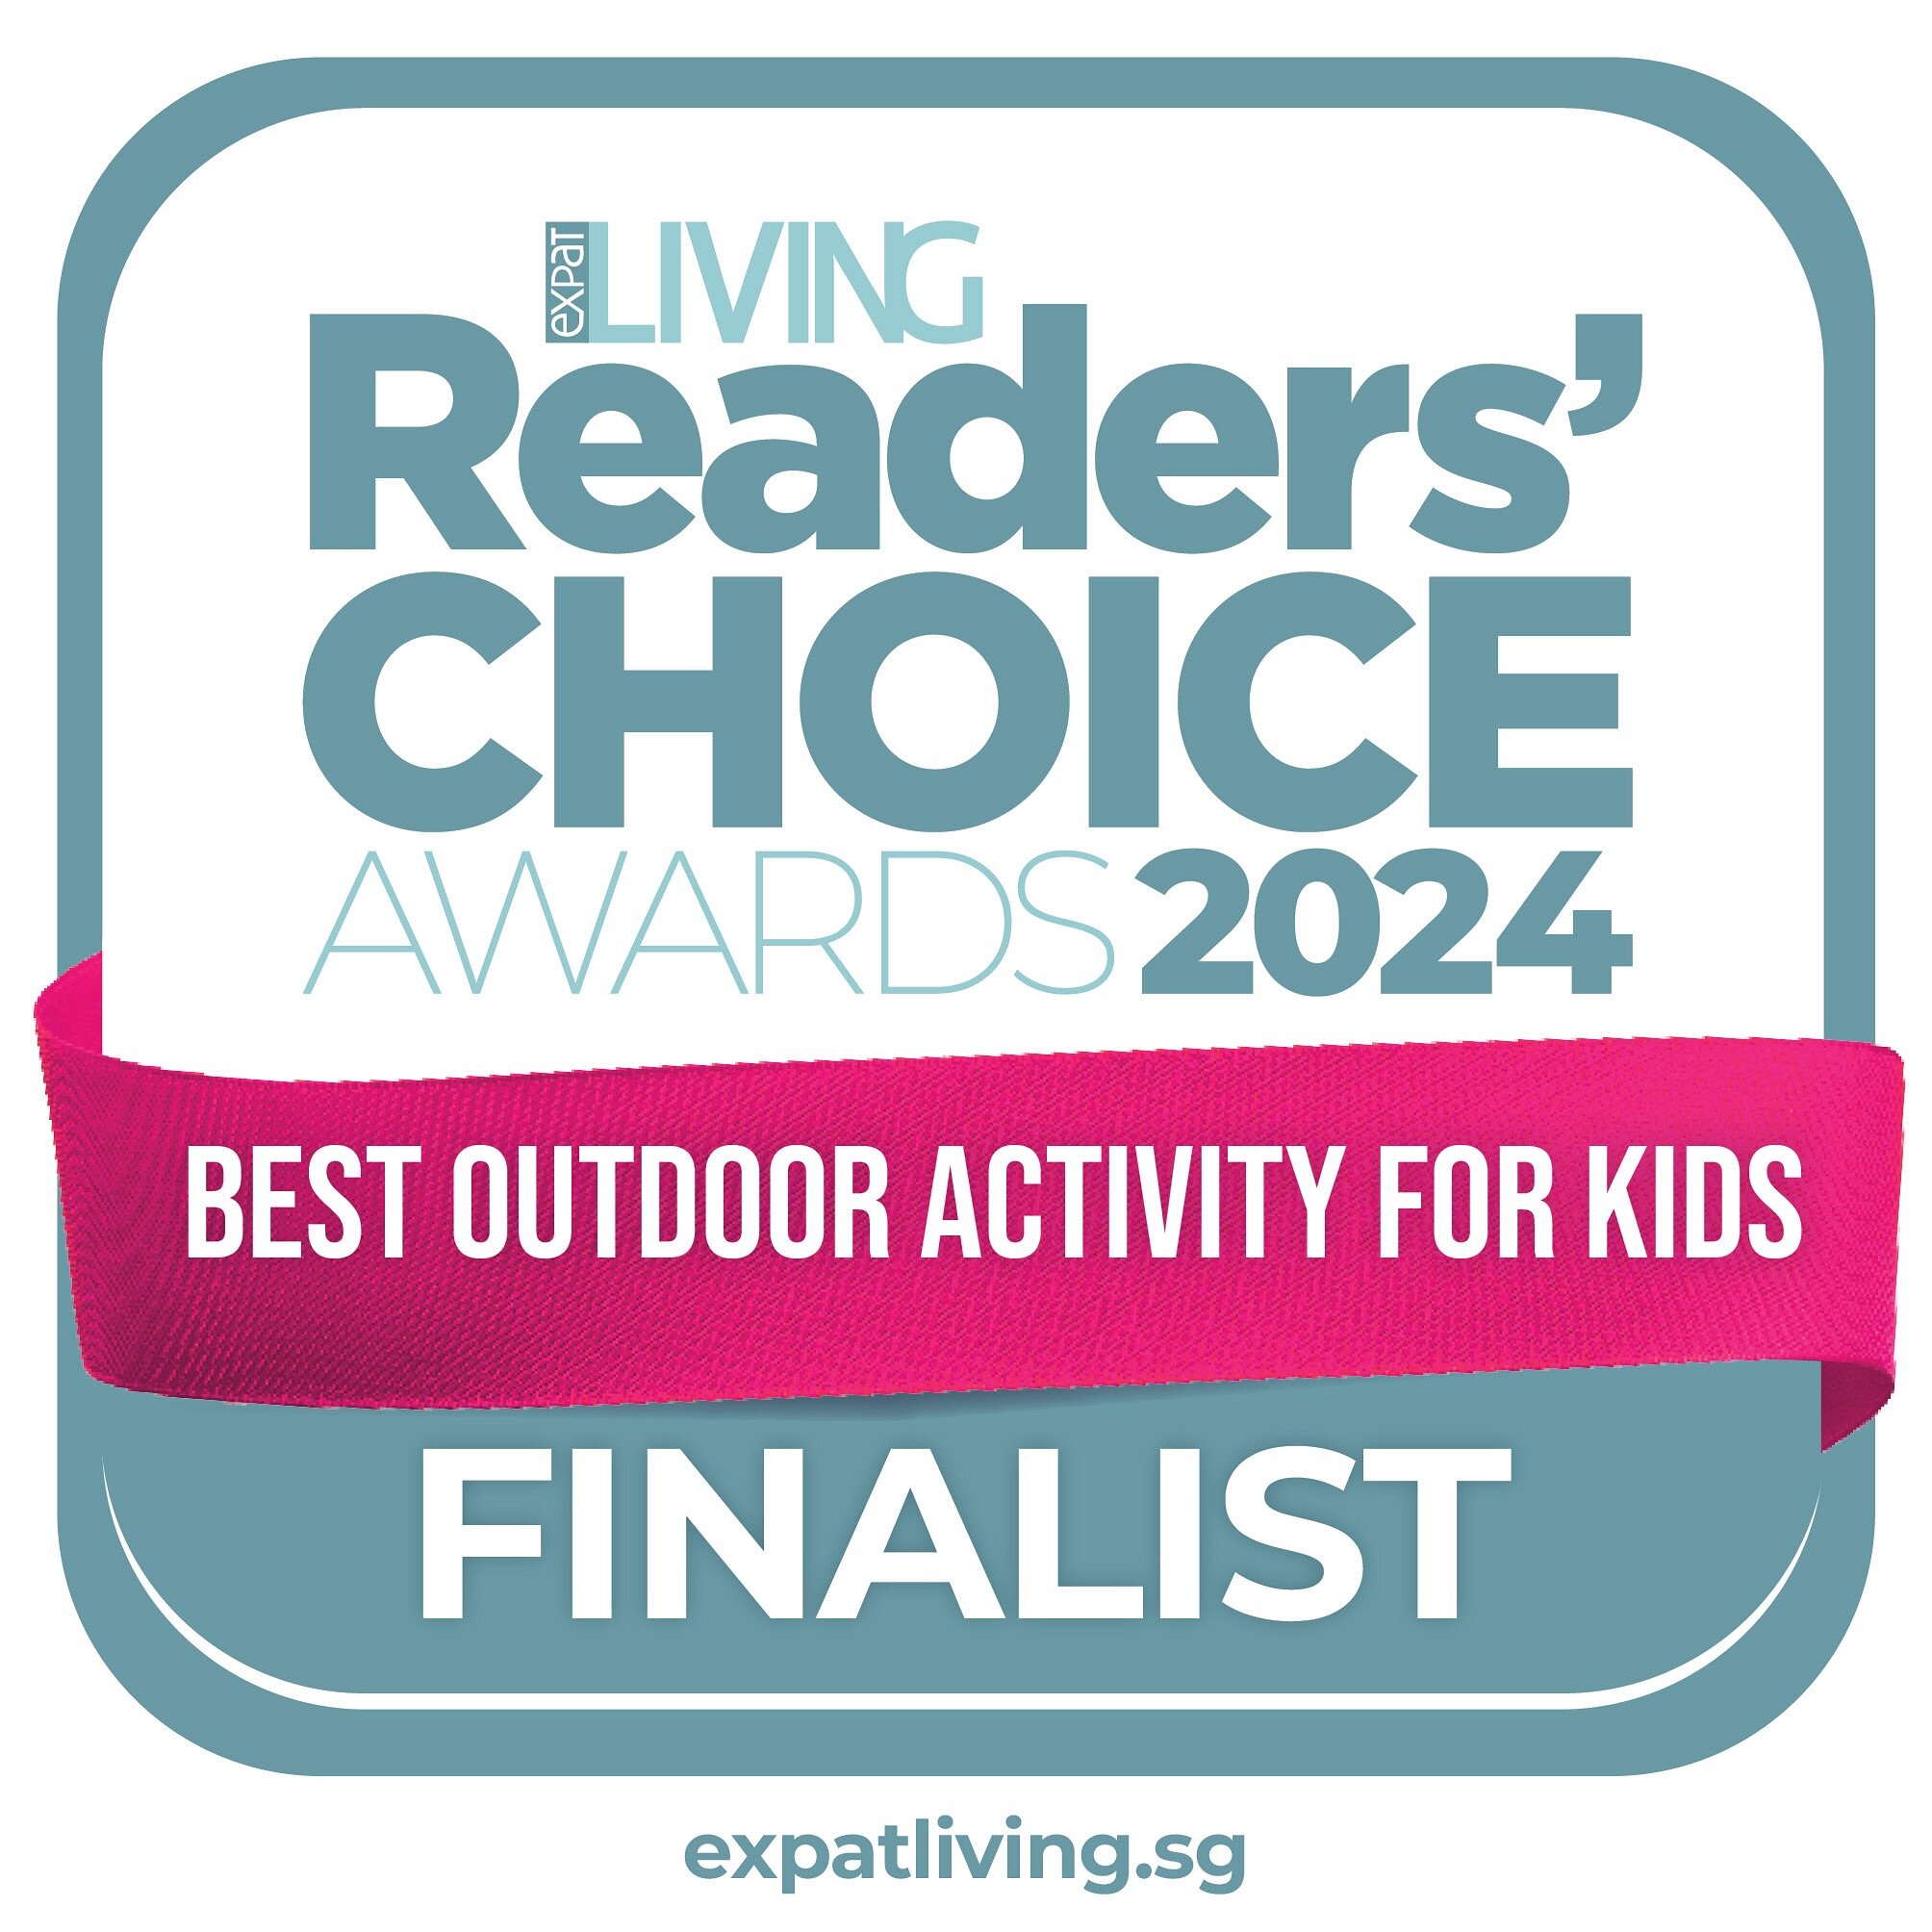 We are absolutely thrilled that you voted for us in Expat Living&rsquo;s recent Readers&rsquo; Choice Awards &mdash; we&rsquo;re the FINALIST Winner for Best Outdoor Activity for Kids! Woohoo 🥳 

Big thanks to our team, parents, players and all our 